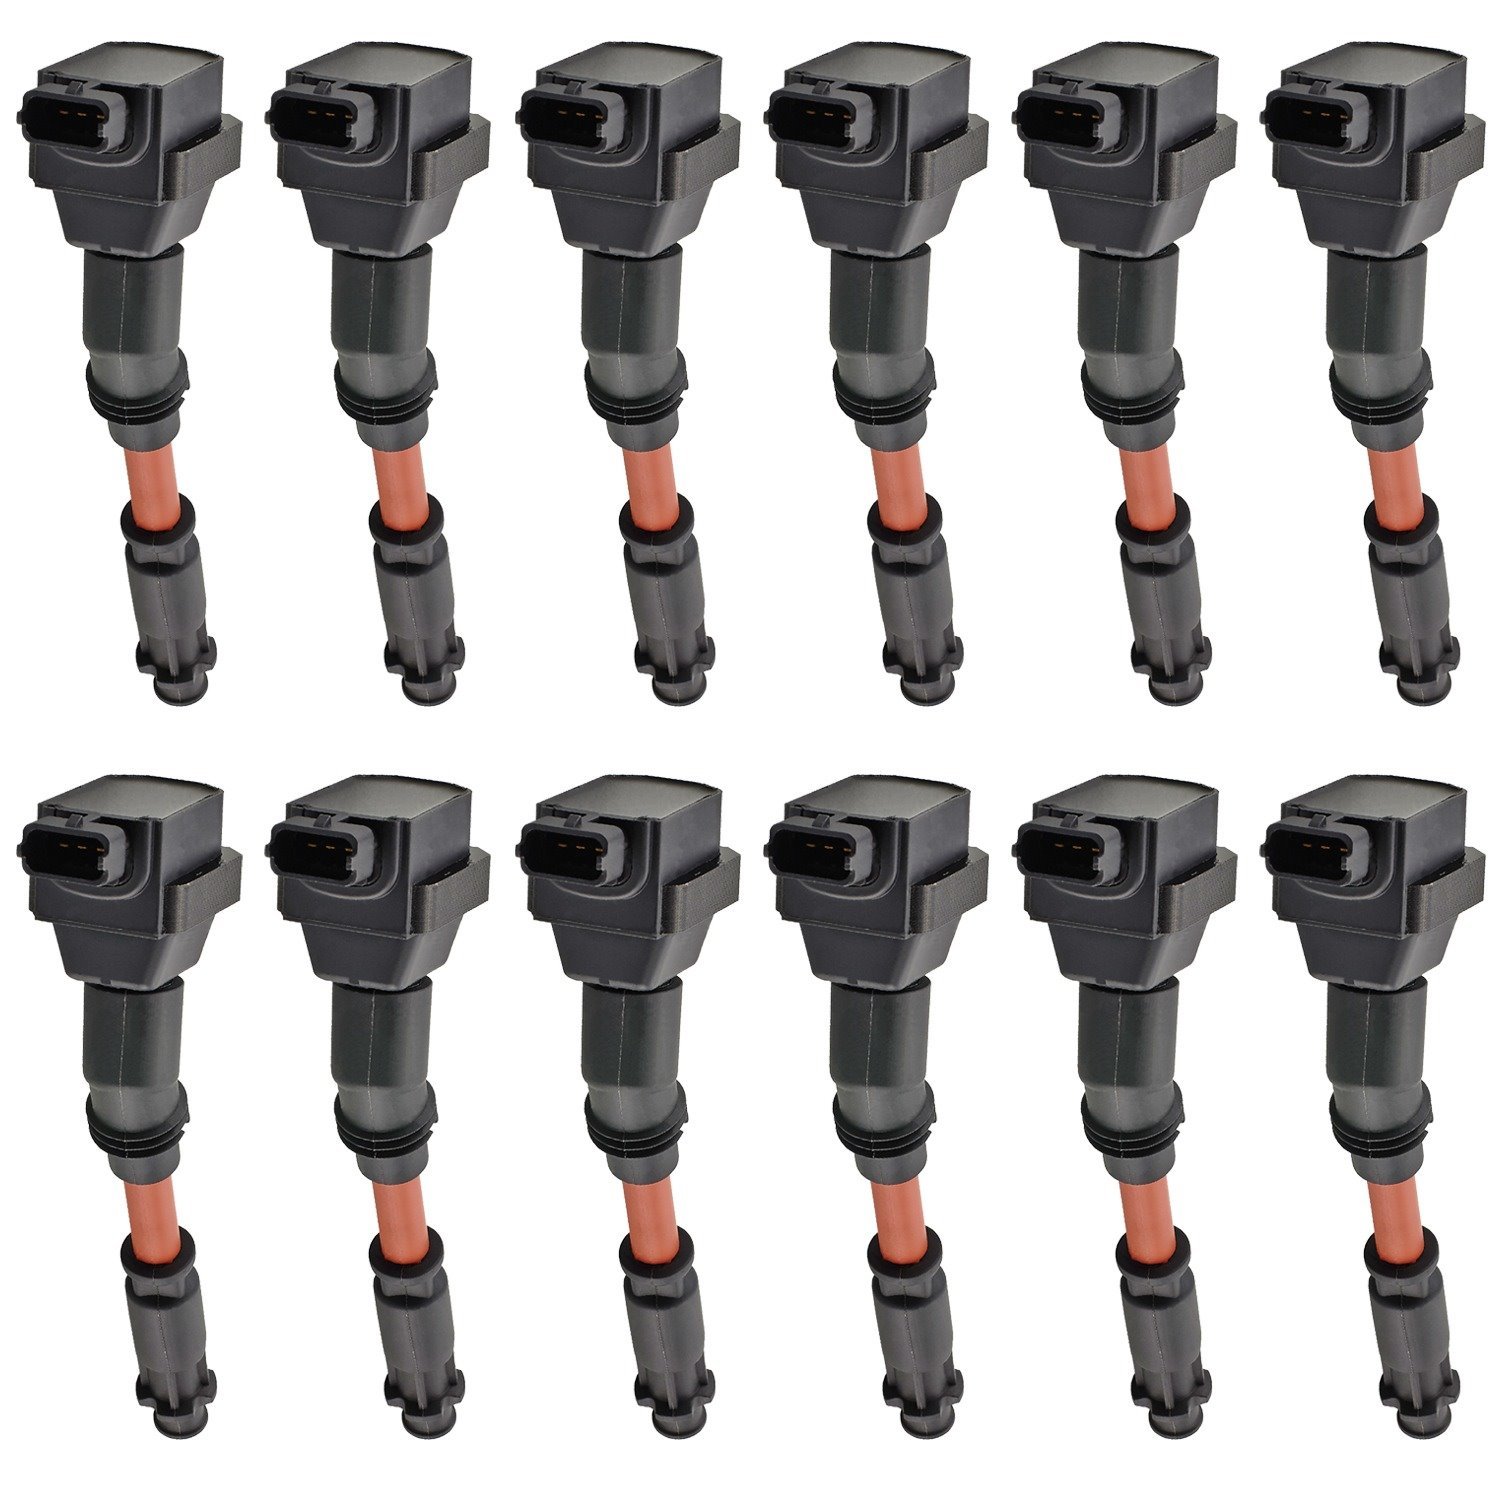 OE Replacement Ignition Coils for 1996-1999 Mercedes Benz S500 5.0L S420 4.2L V8